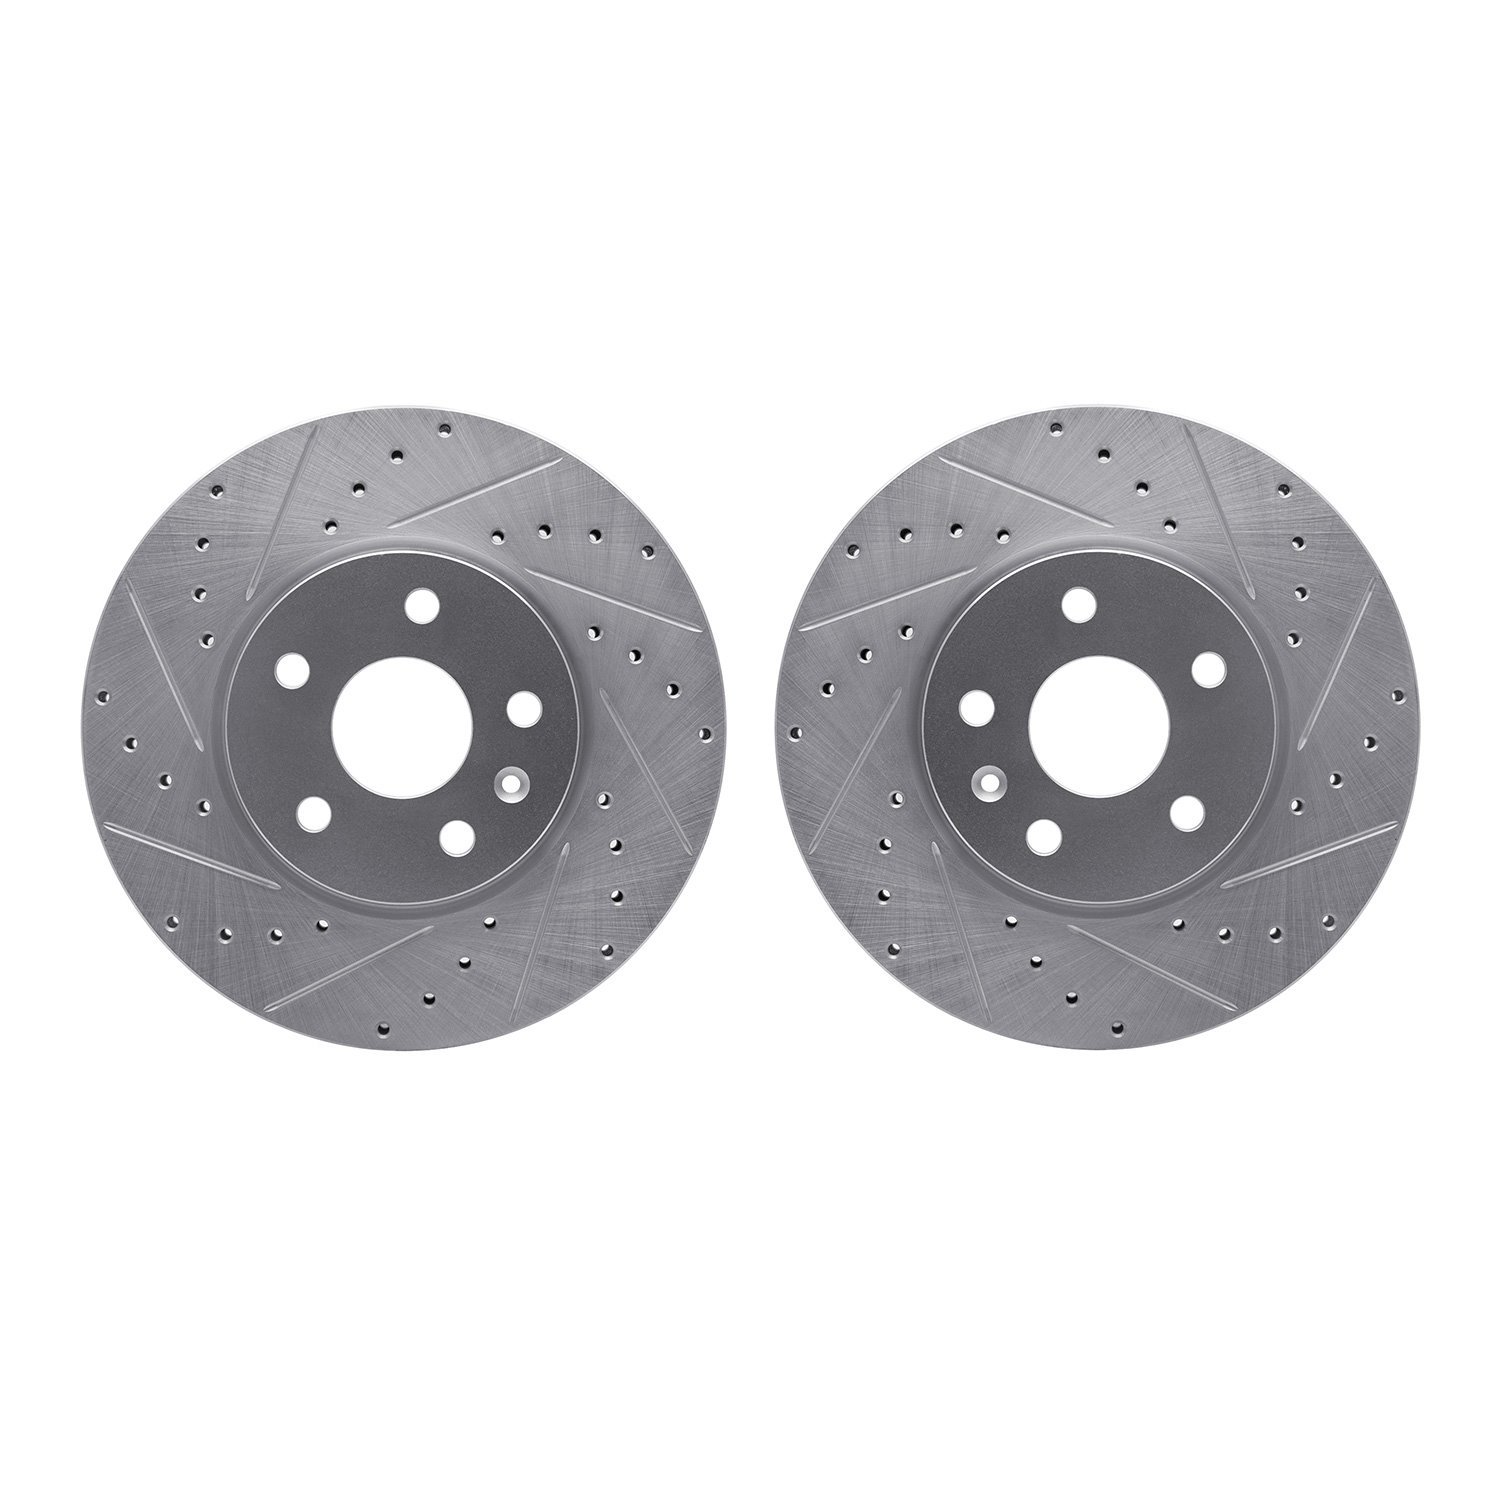 Drilled/Slotted Brake Rotors [Silver], Fits Select GM